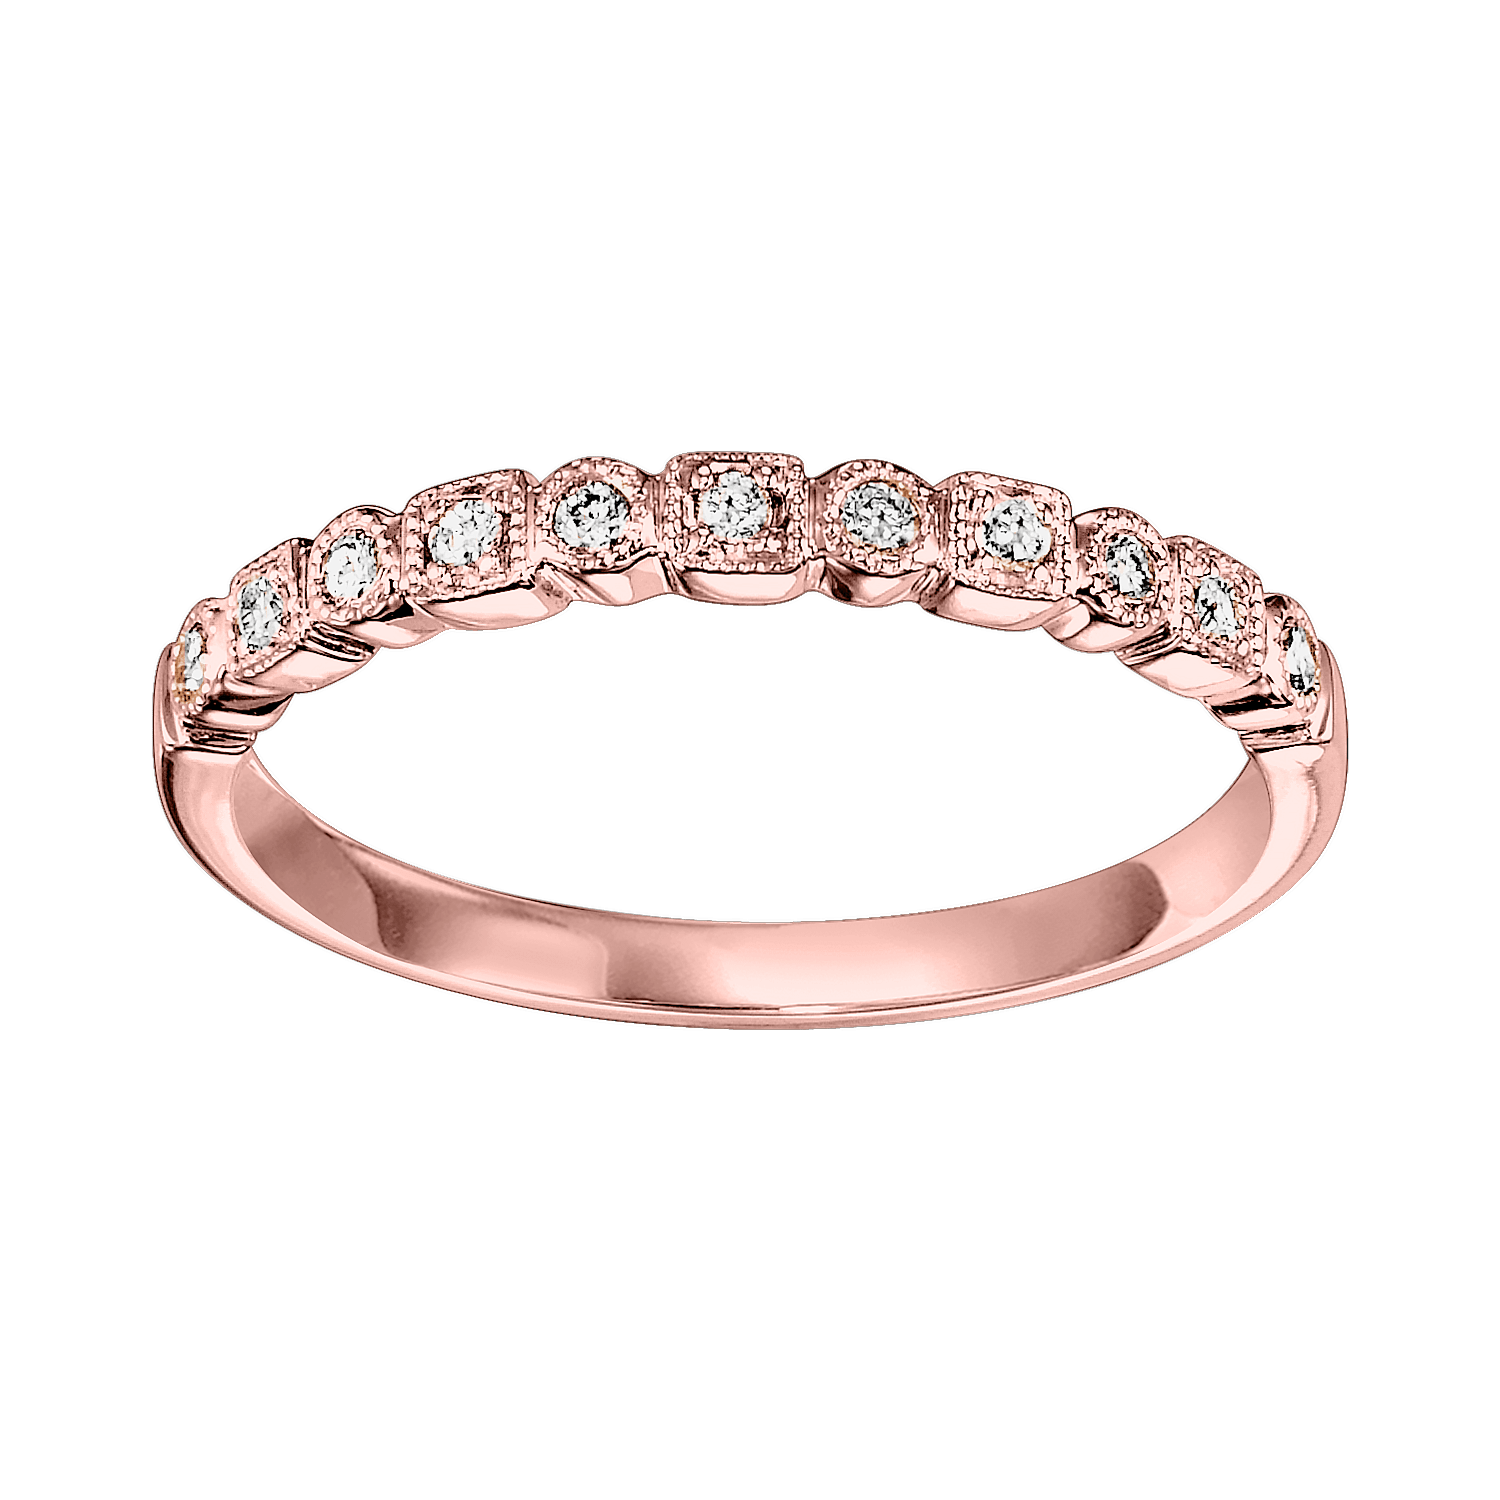 BW James Jewelers Ring 16 Page Christmas Catalog Offer 10K Rose Gold Mixable Ring